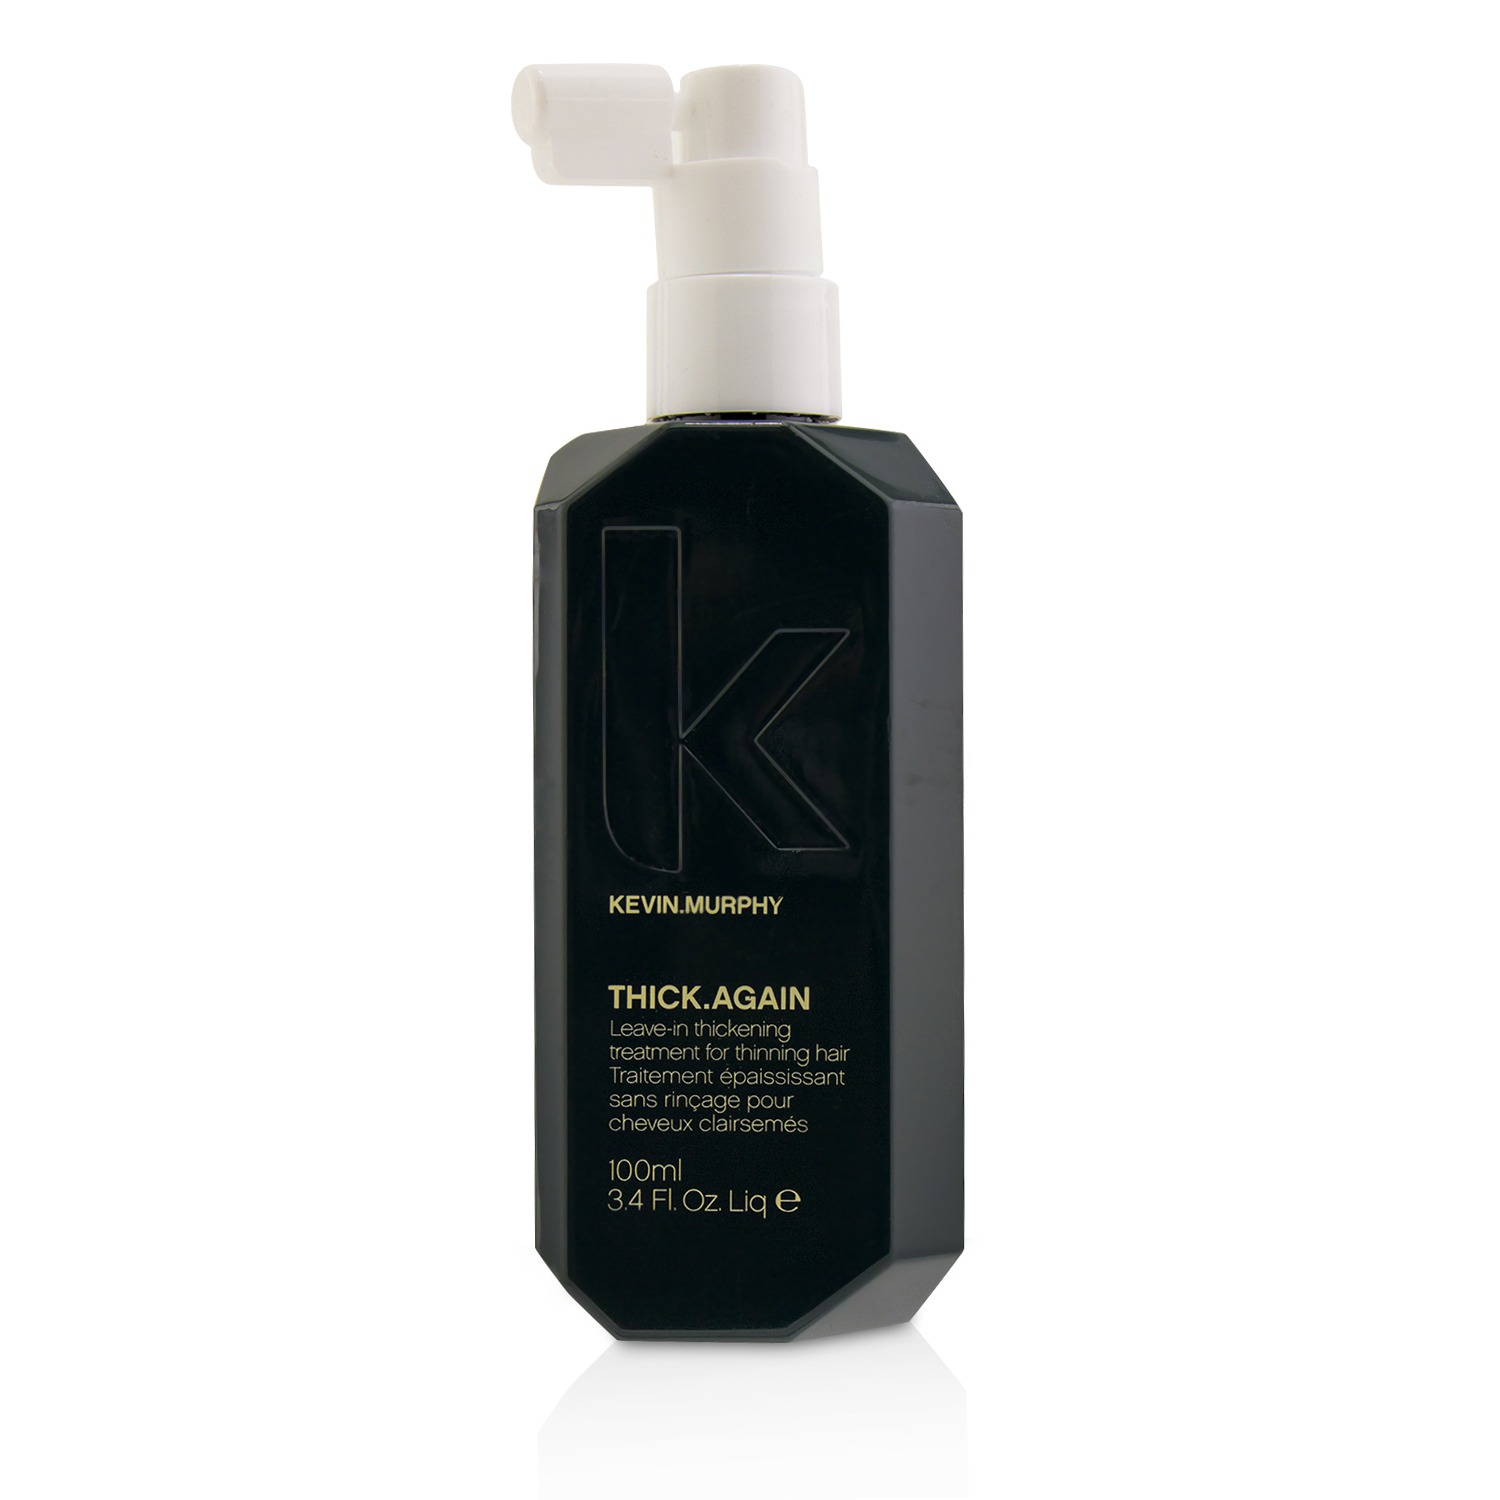 Thick.Again (Leave-In Thickening Treatment - For Thinning Hair) Kevin.Murphy Image